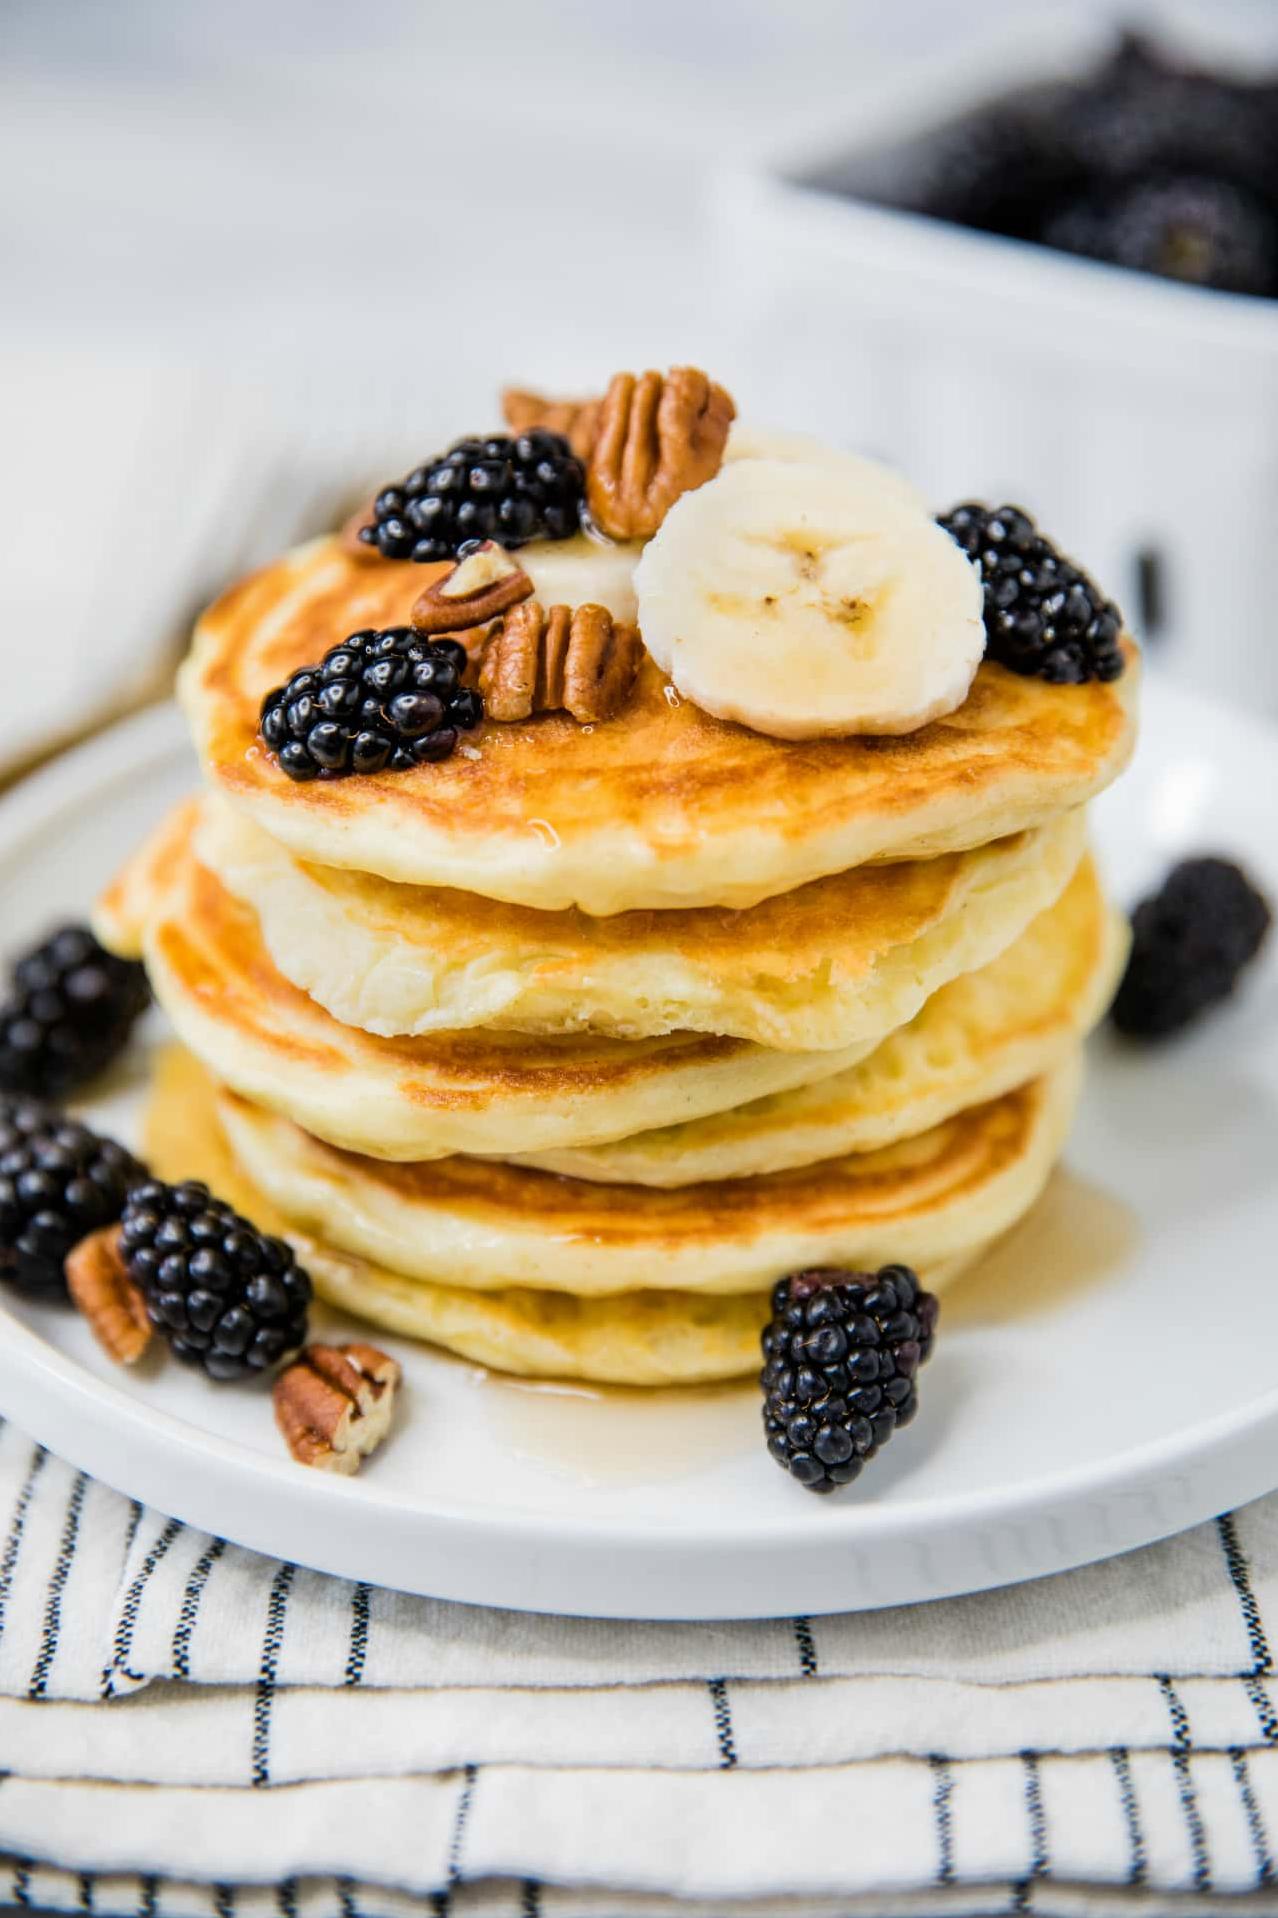  Melt-in-your-mouth delicious! These pancakes are perfect for a lazy weekend brunch.